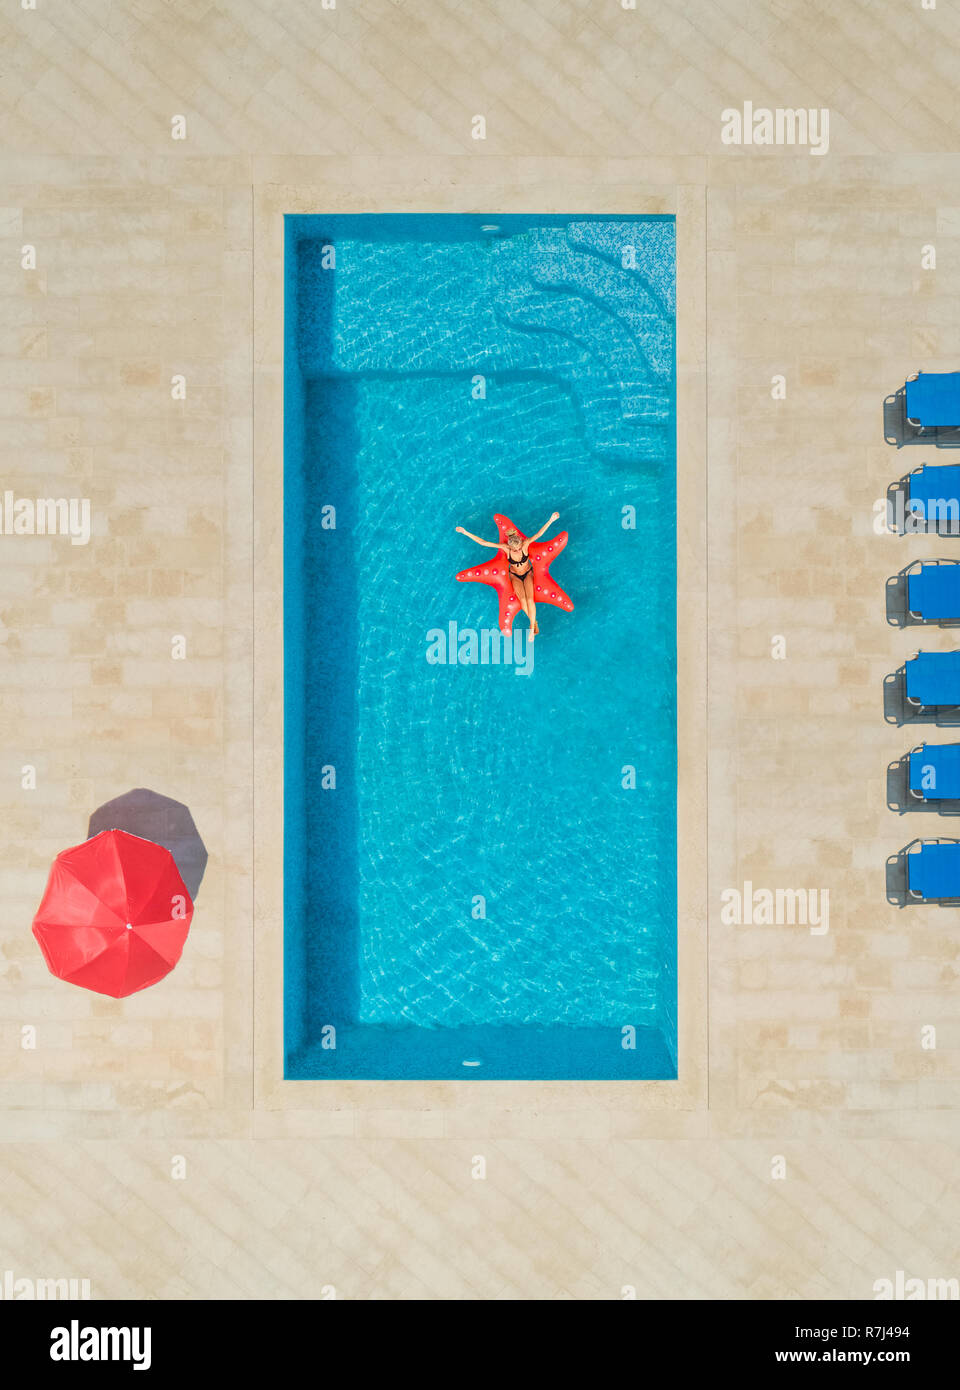 Aerial view of woman on star shapes inflatable mattress in swimming pool surrounded by deck chairs and parasol. Stock Photo